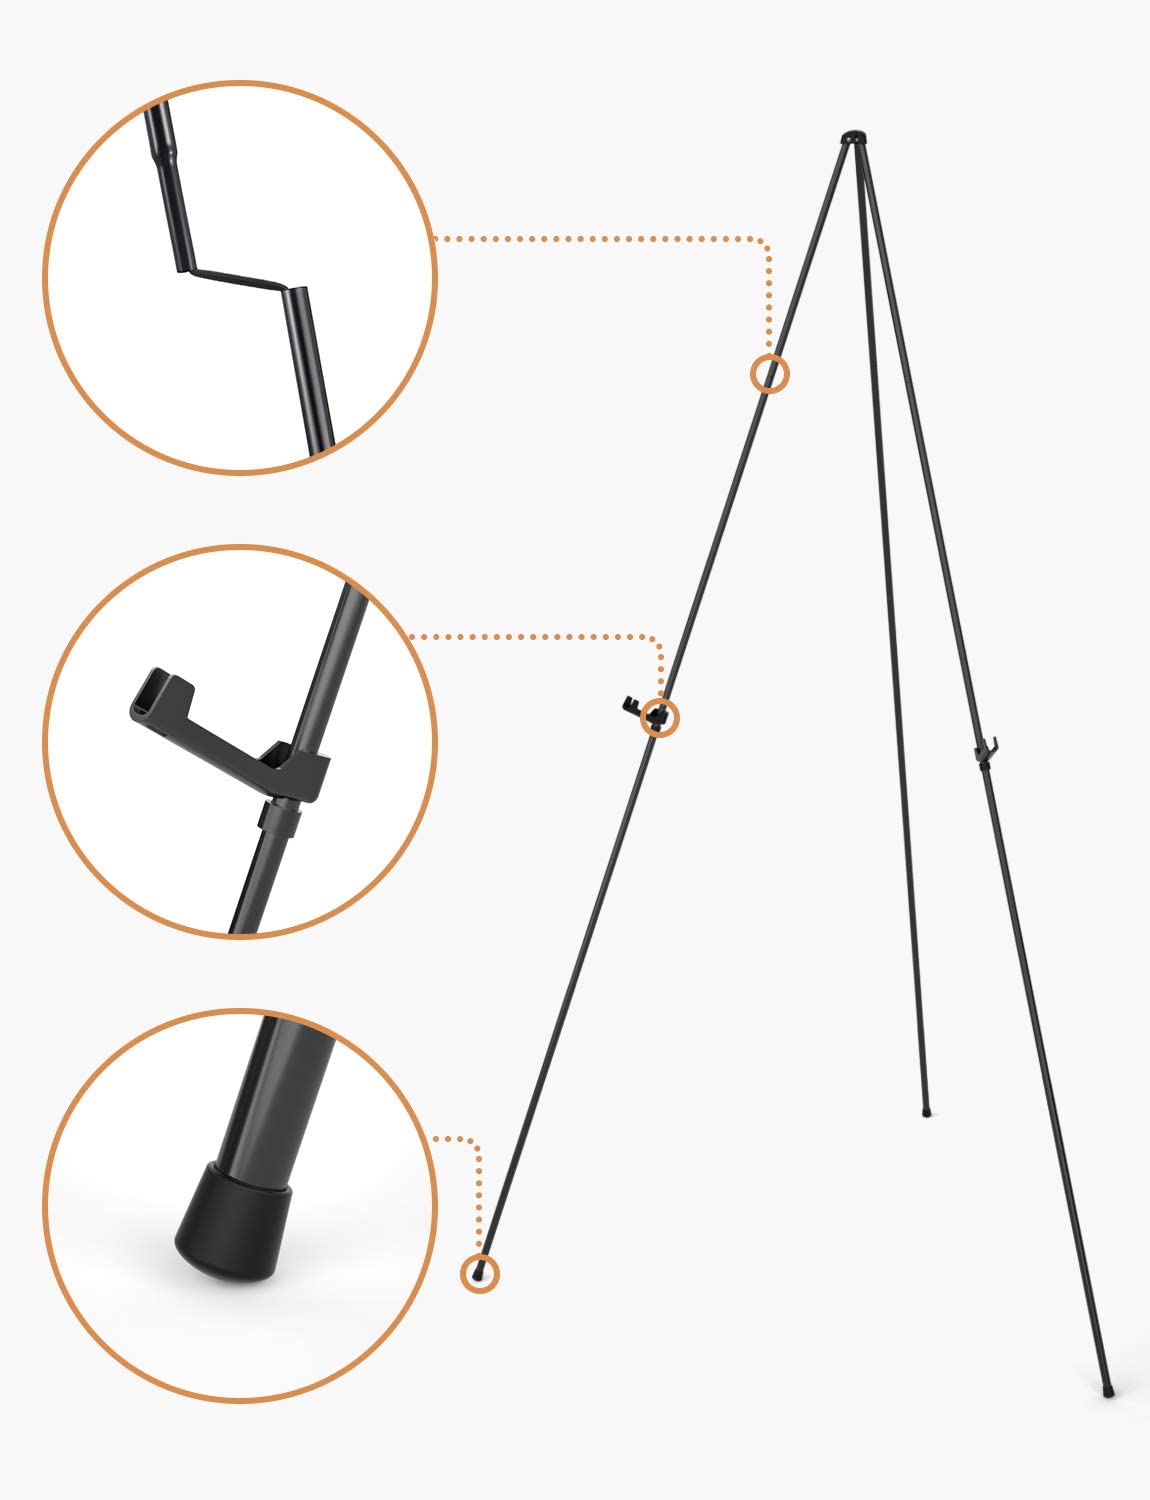 Mutualsign Folding Easel for Display, Portable Tripod, Easy-Set-up Floor Standing Poster Easel,Lightweight Metal Adjustable Display Easel